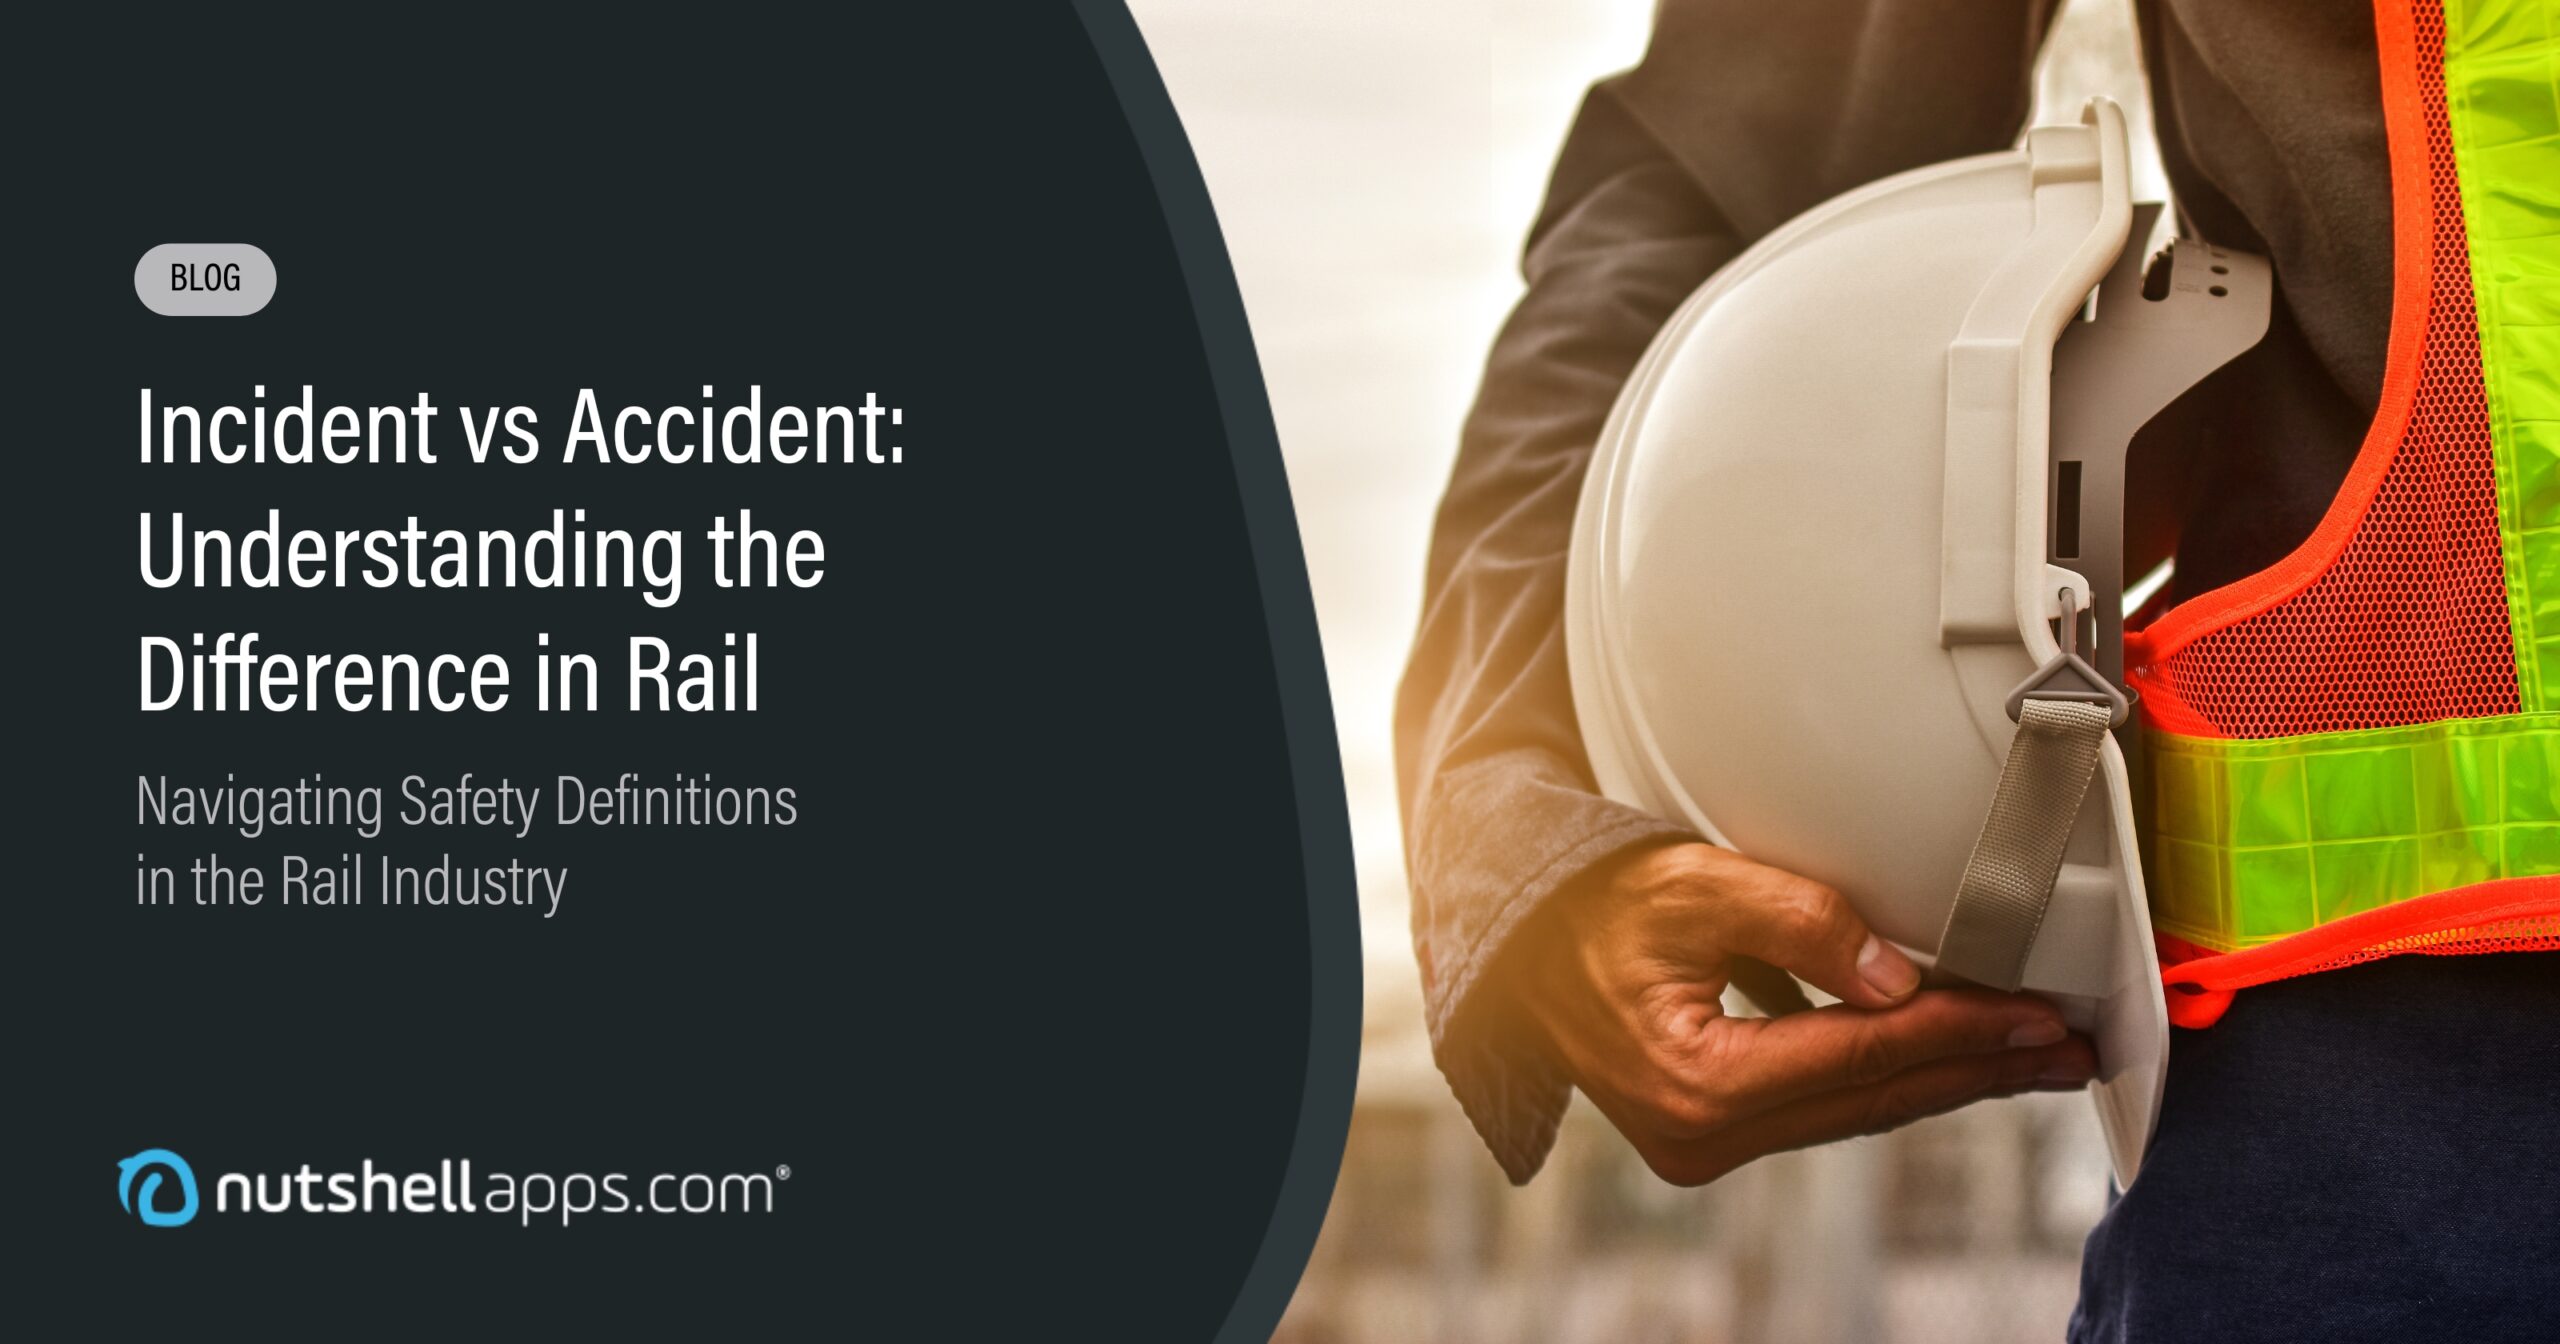 Blog | Incident vs Accident: Understanding the Difference in Rail